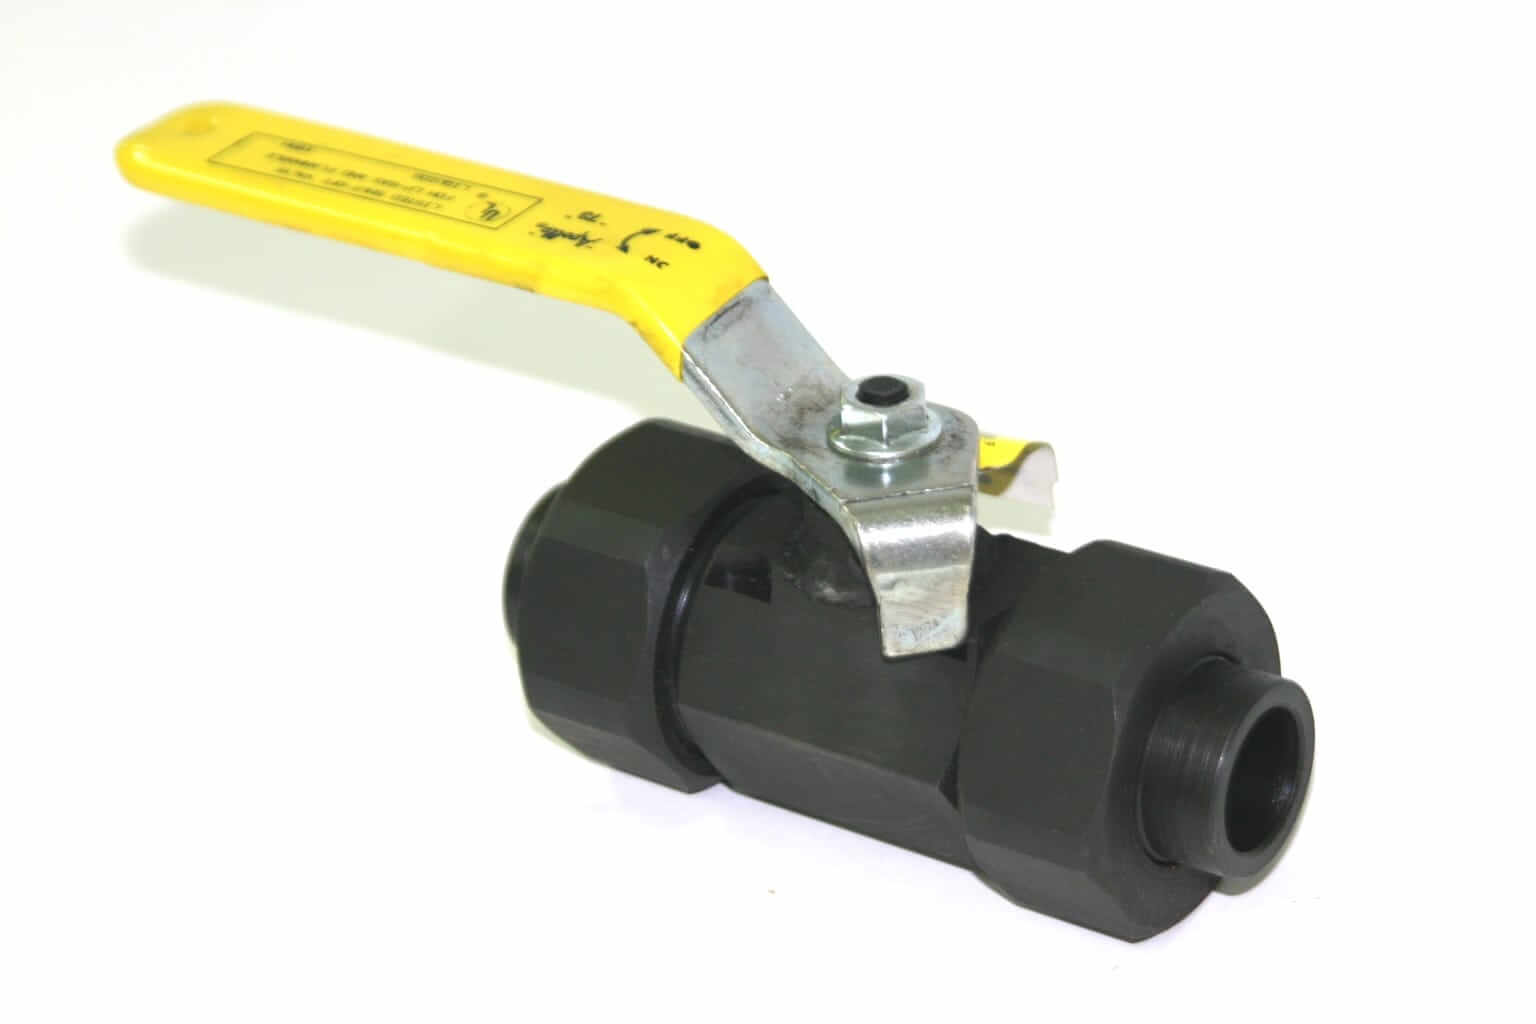 Ball Valve, 1 Inch Size, Socket Weld, Double U-End, Carbon Steel, 250 Psi